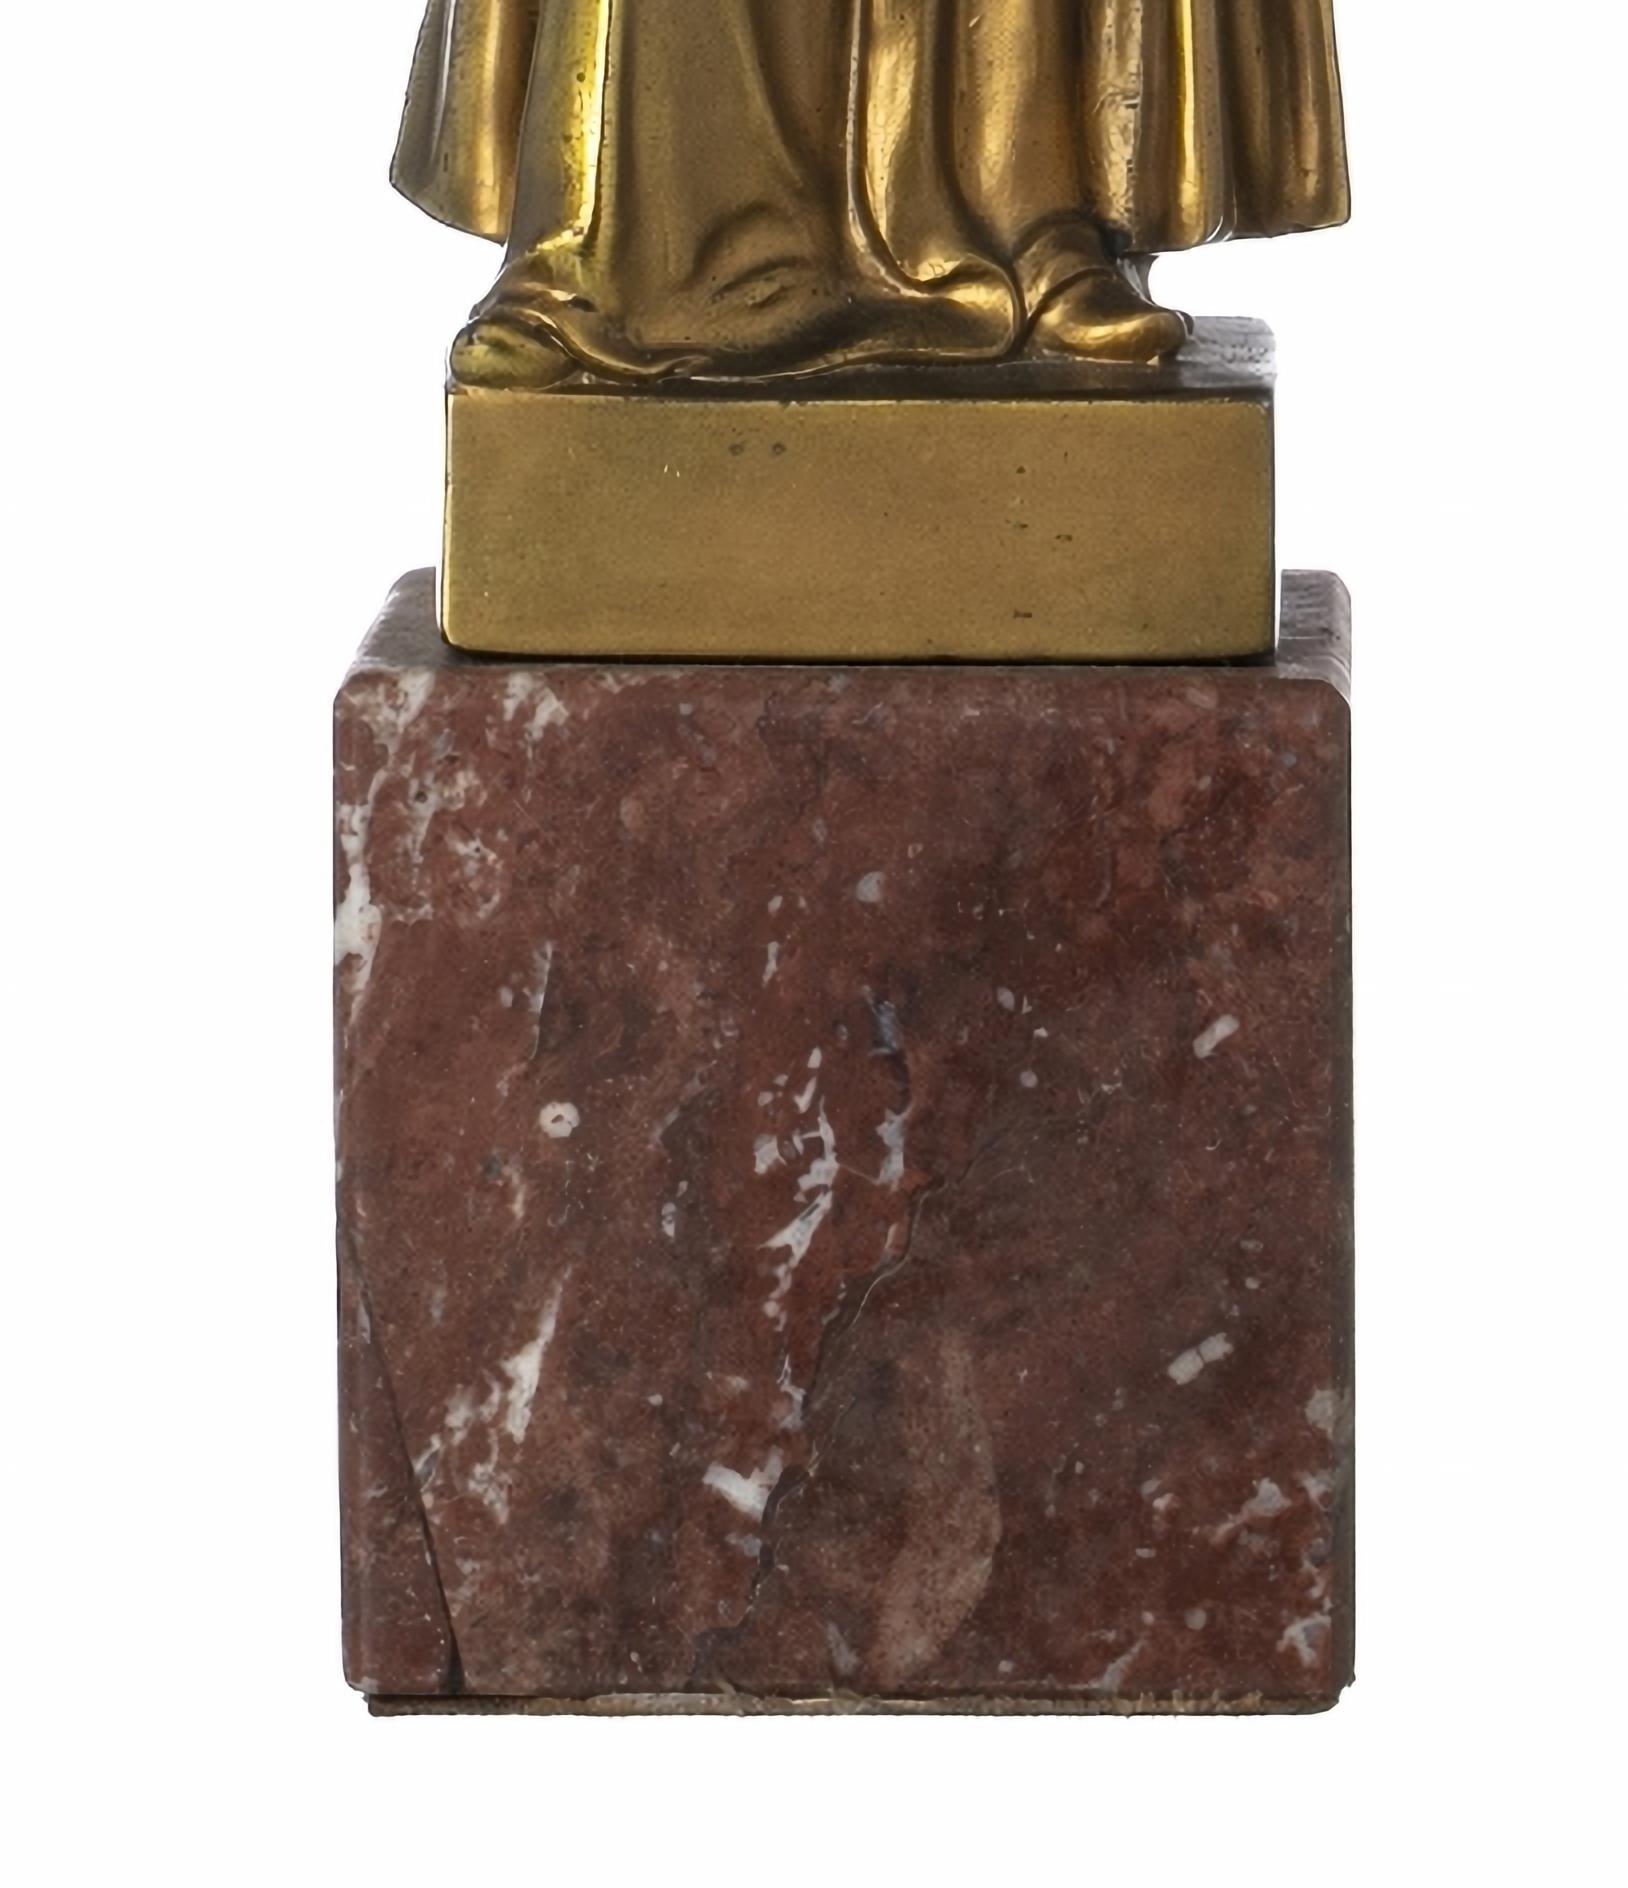 RICHARD W. LANGE (1879-1944) Sculpture early 20th Century

Sculpture, in gilded bronze, with face and hands in bakelite.
Standing on a marble base.
Signed and dated 1914.
Height: 33 cm.
good conditions

Richard W. Lange was a German artist who was